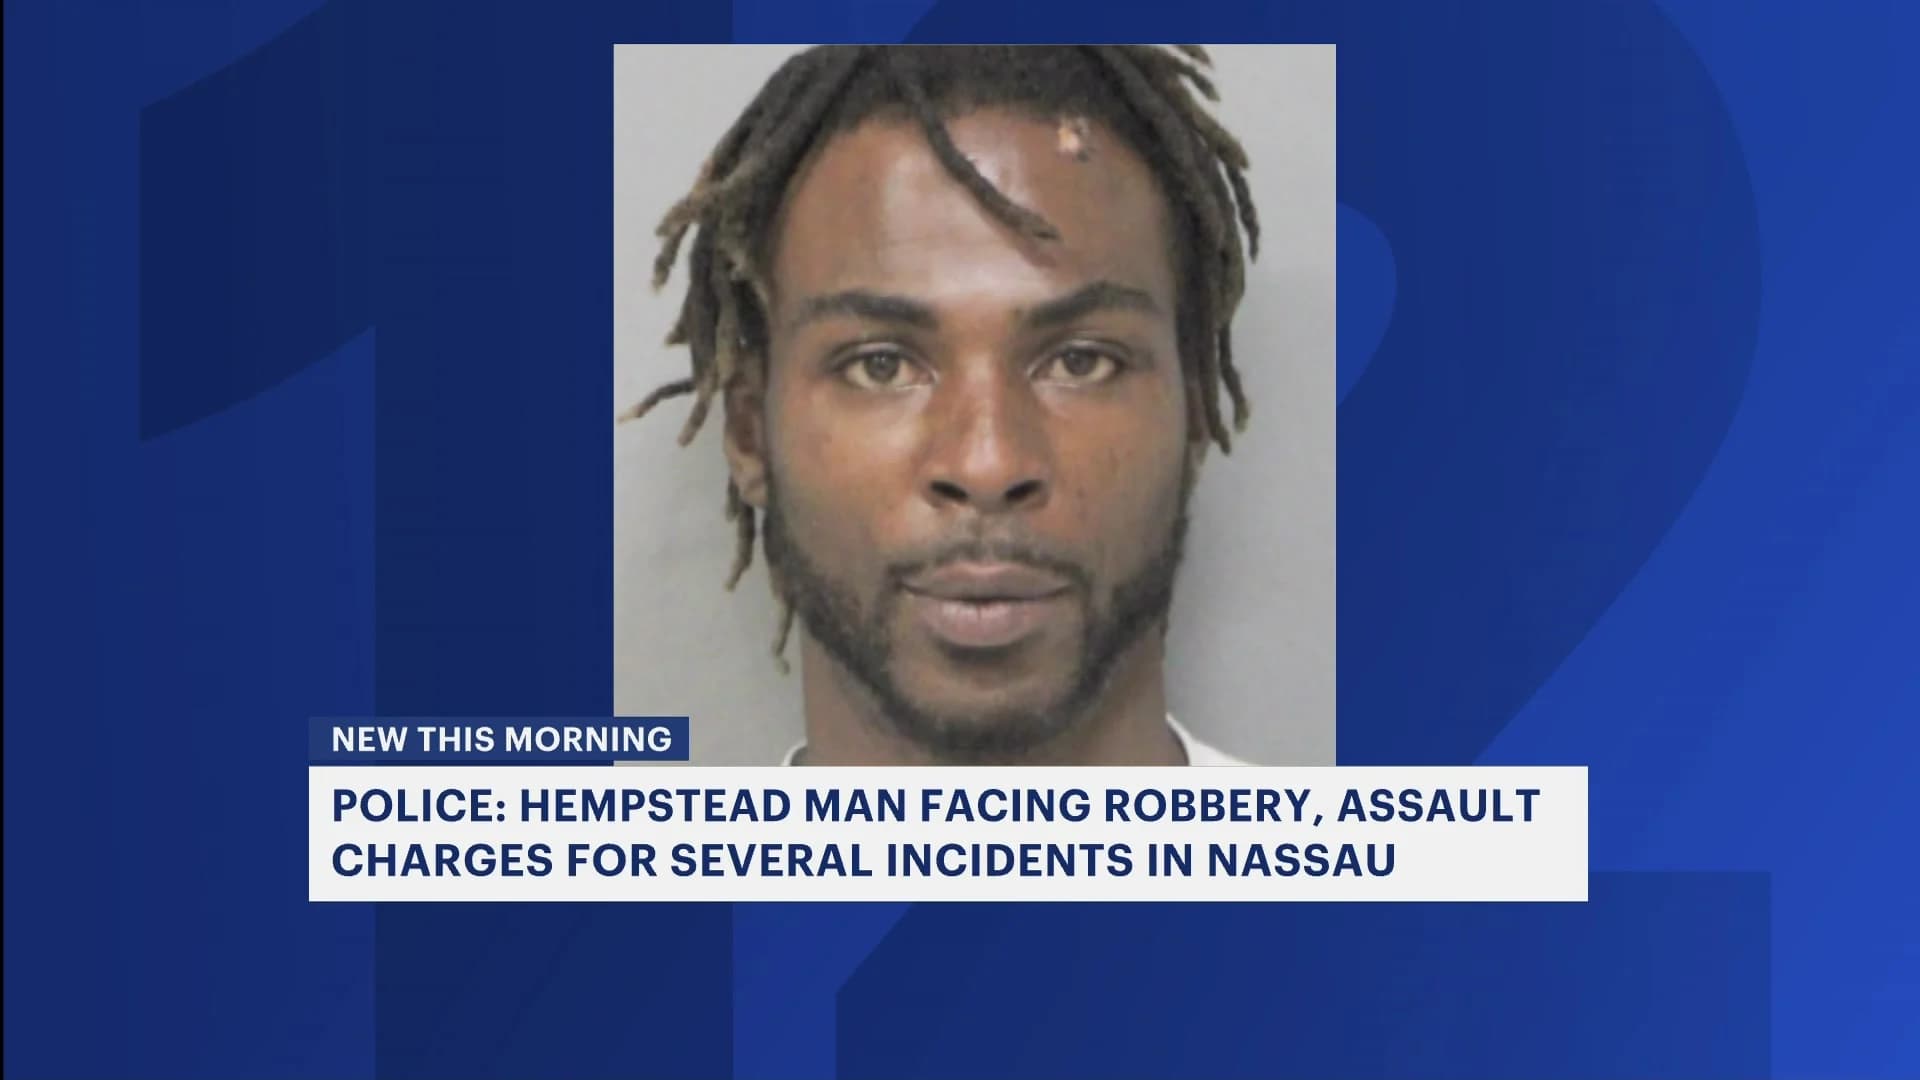 Police: Hempstead man accused of robbing woman, crashing stolen car, injuring 2 people and resisting arrest